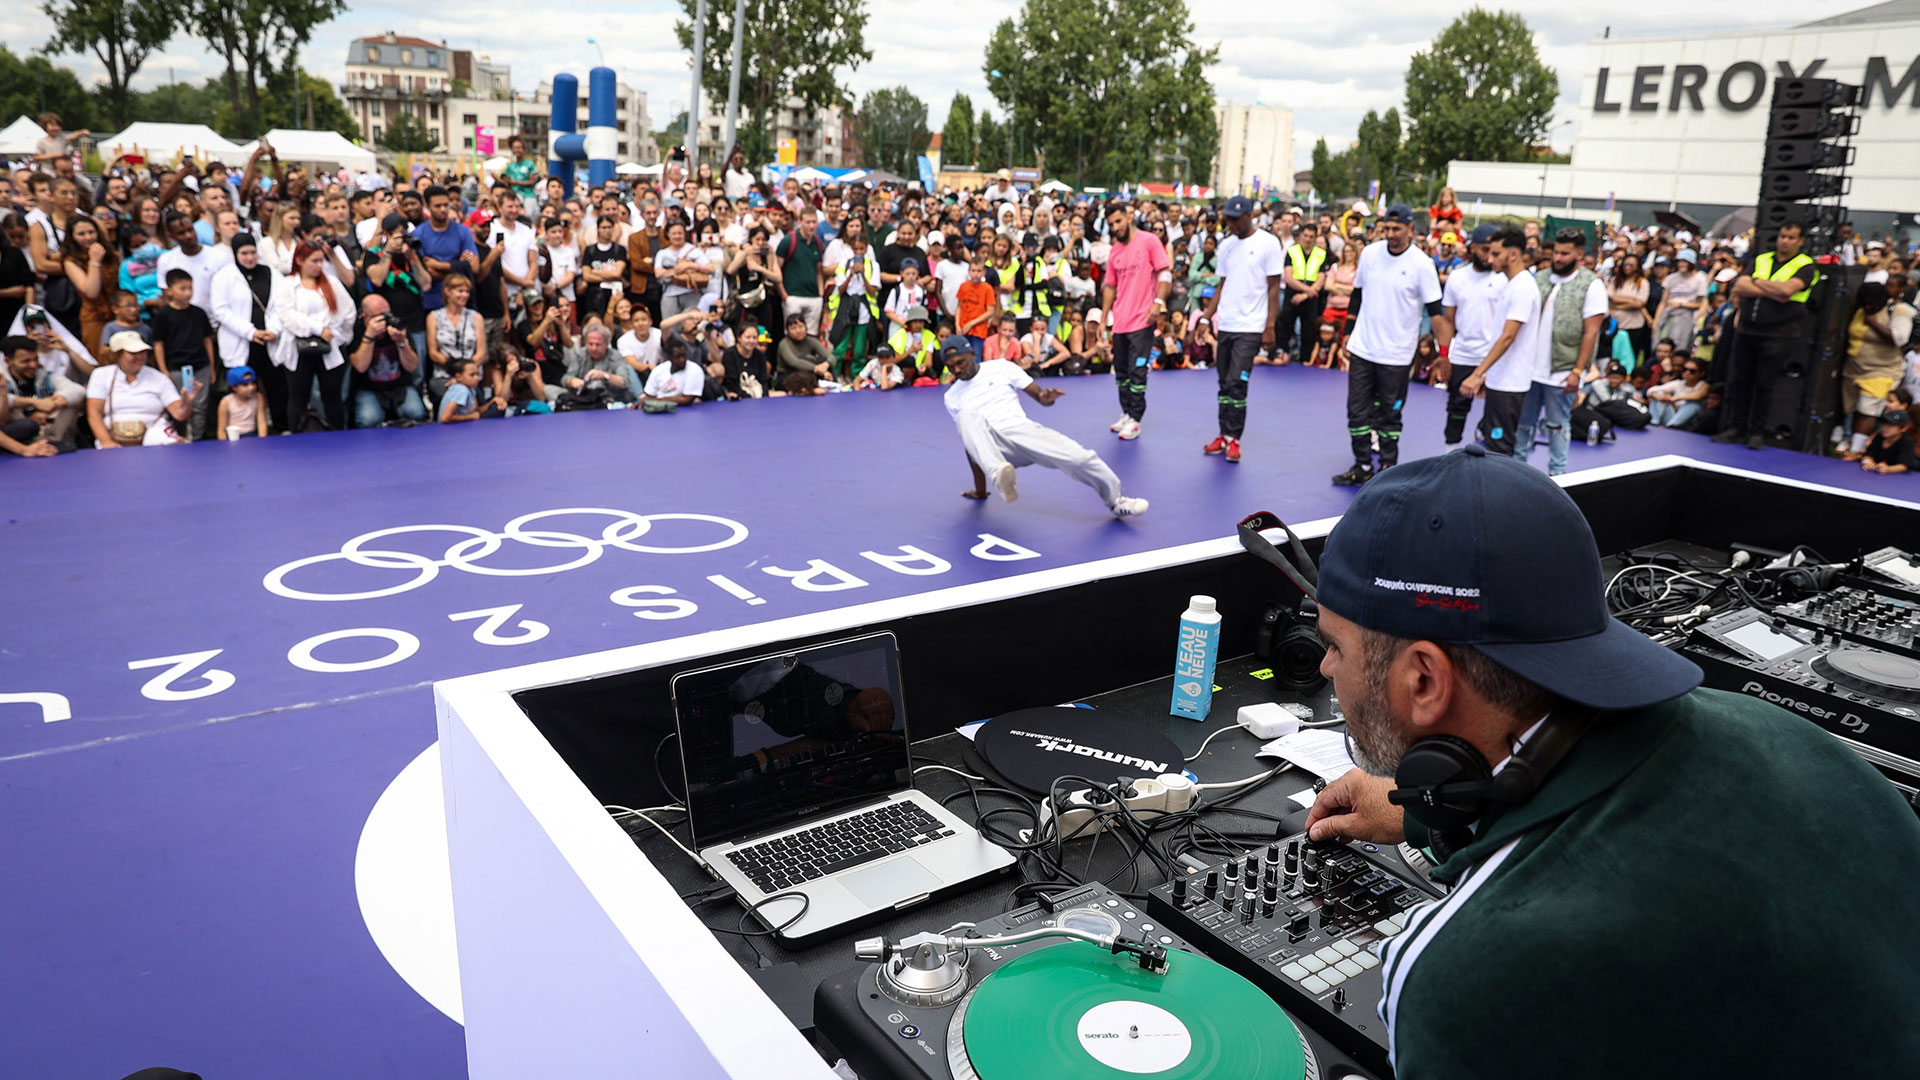 A DJ, music and break dancing enhance the celebration of Olympic Day 2022 in Seine-Saint Denis (Paris 2024)